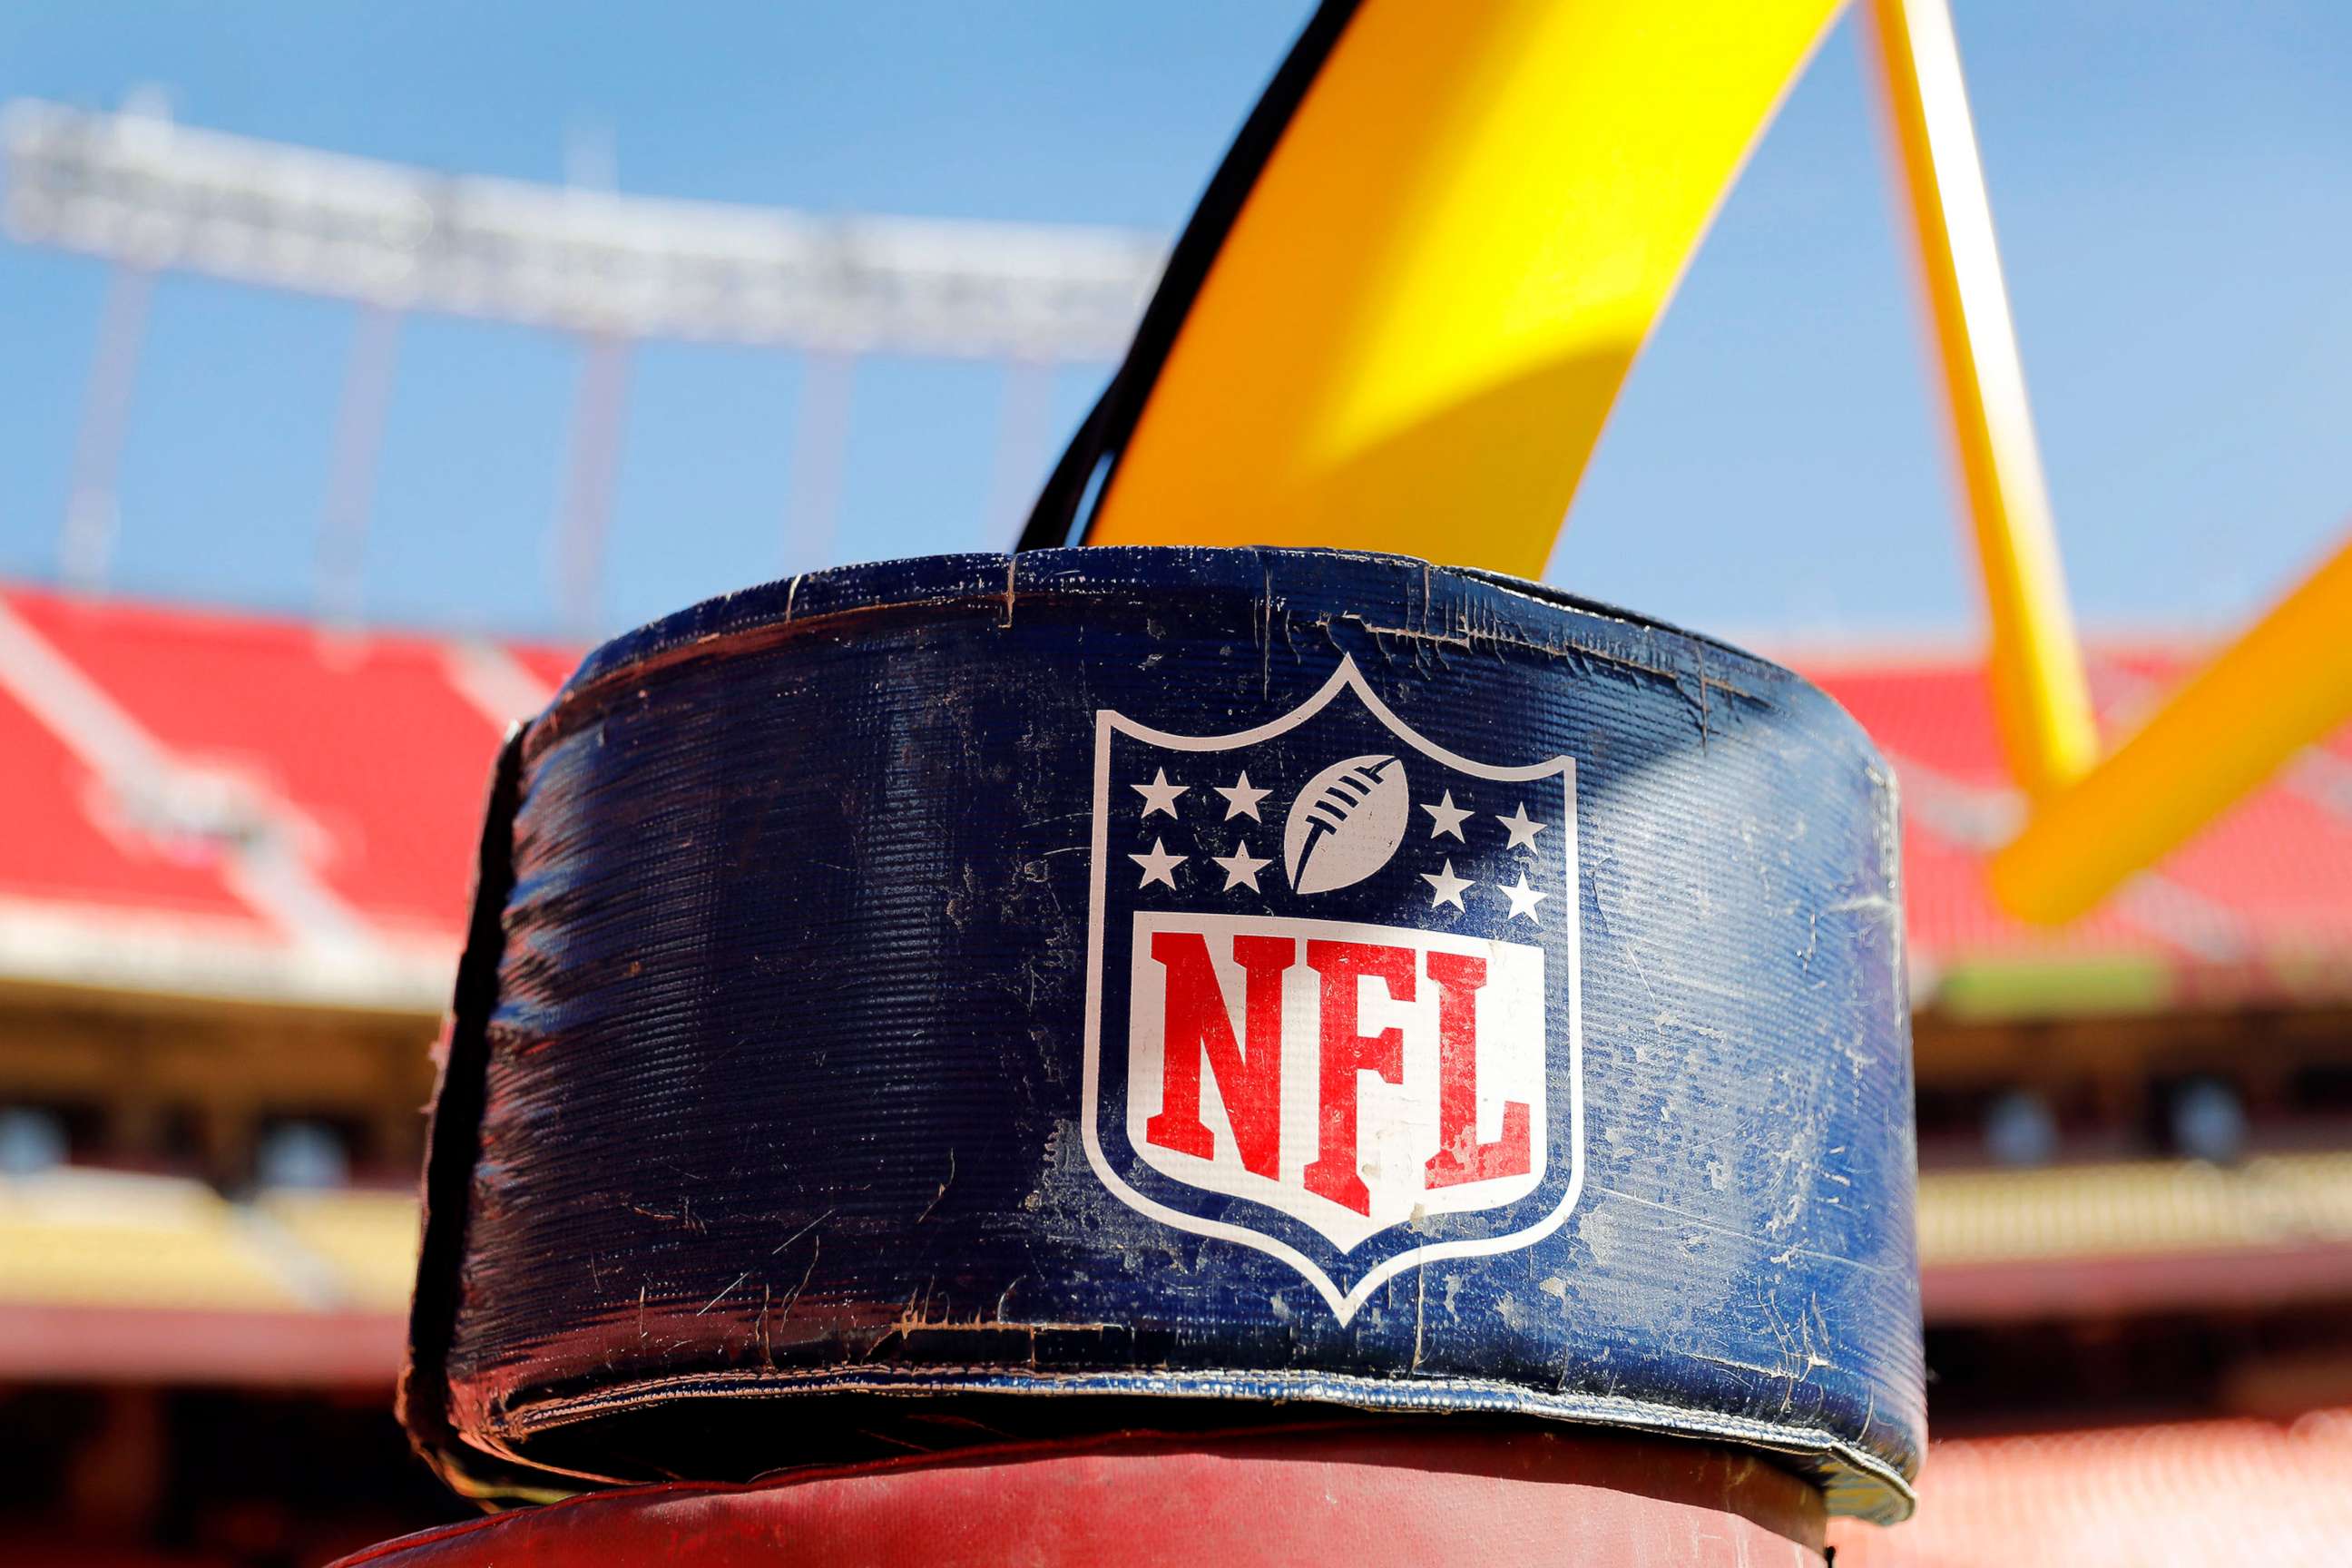 PHOTO: The logo of the National Football League (NFL) on the goal post stanchion at Arrowhead Stadium, Jan. 19, 2020, in Kansas City, Mo.